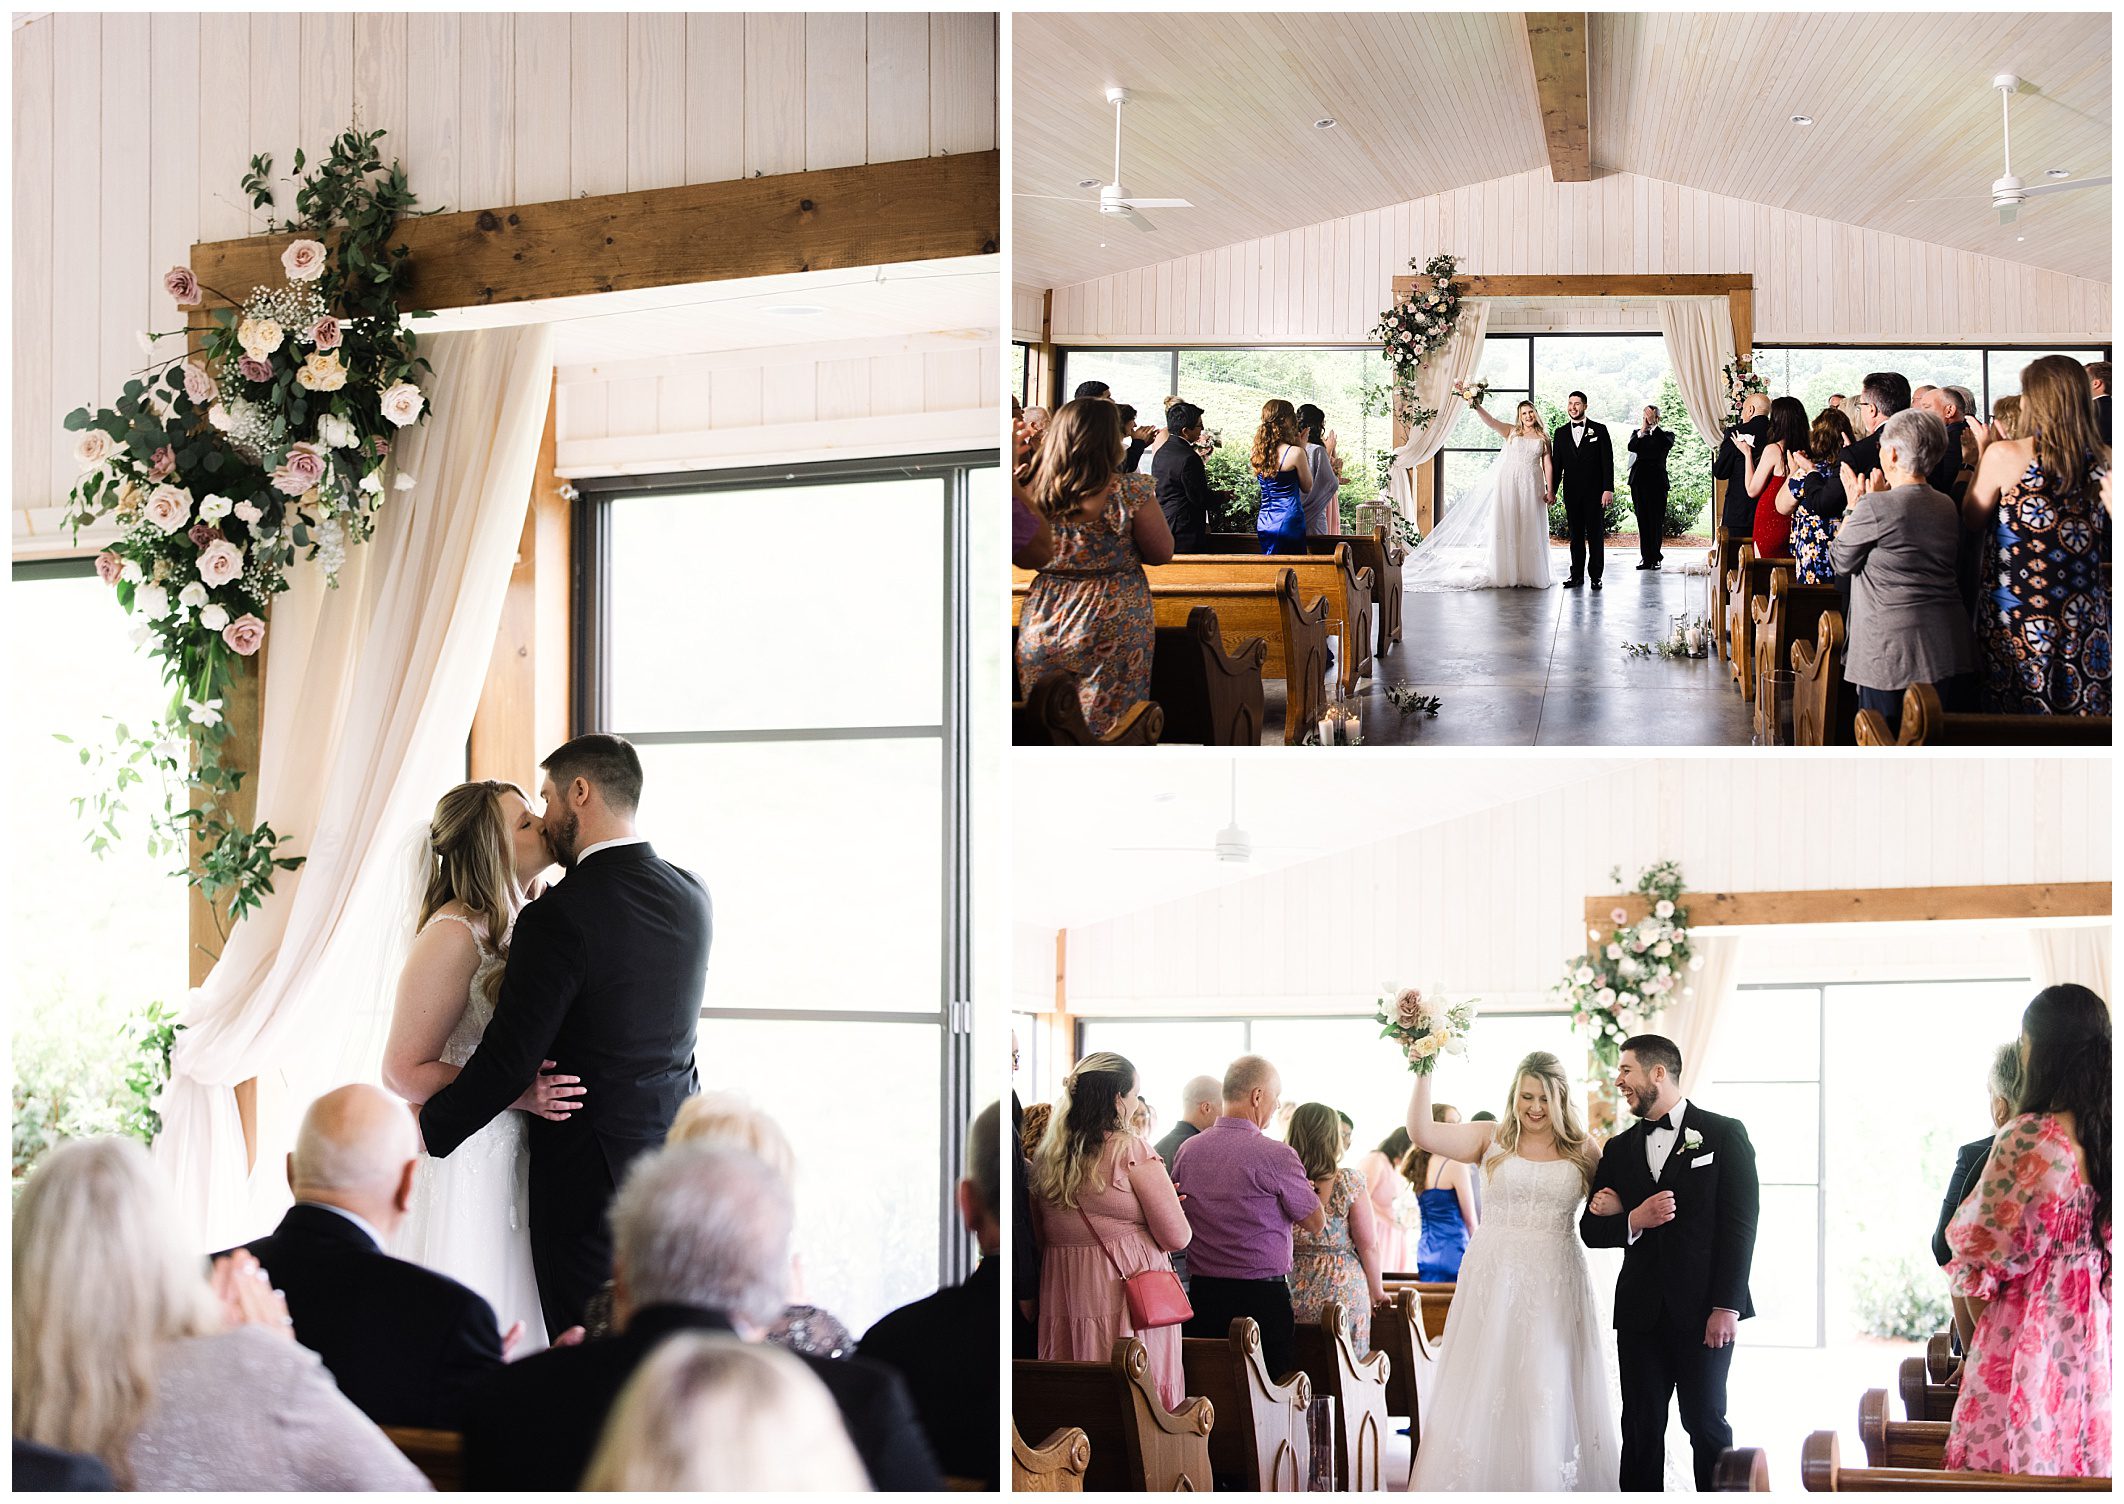 A collage of four mountain wedding scenes at Chestnut Ridge: a couple embracing by a window, guests at a ceremony, the bride and groom walking down the aisle, and an attentive audience during the vows.